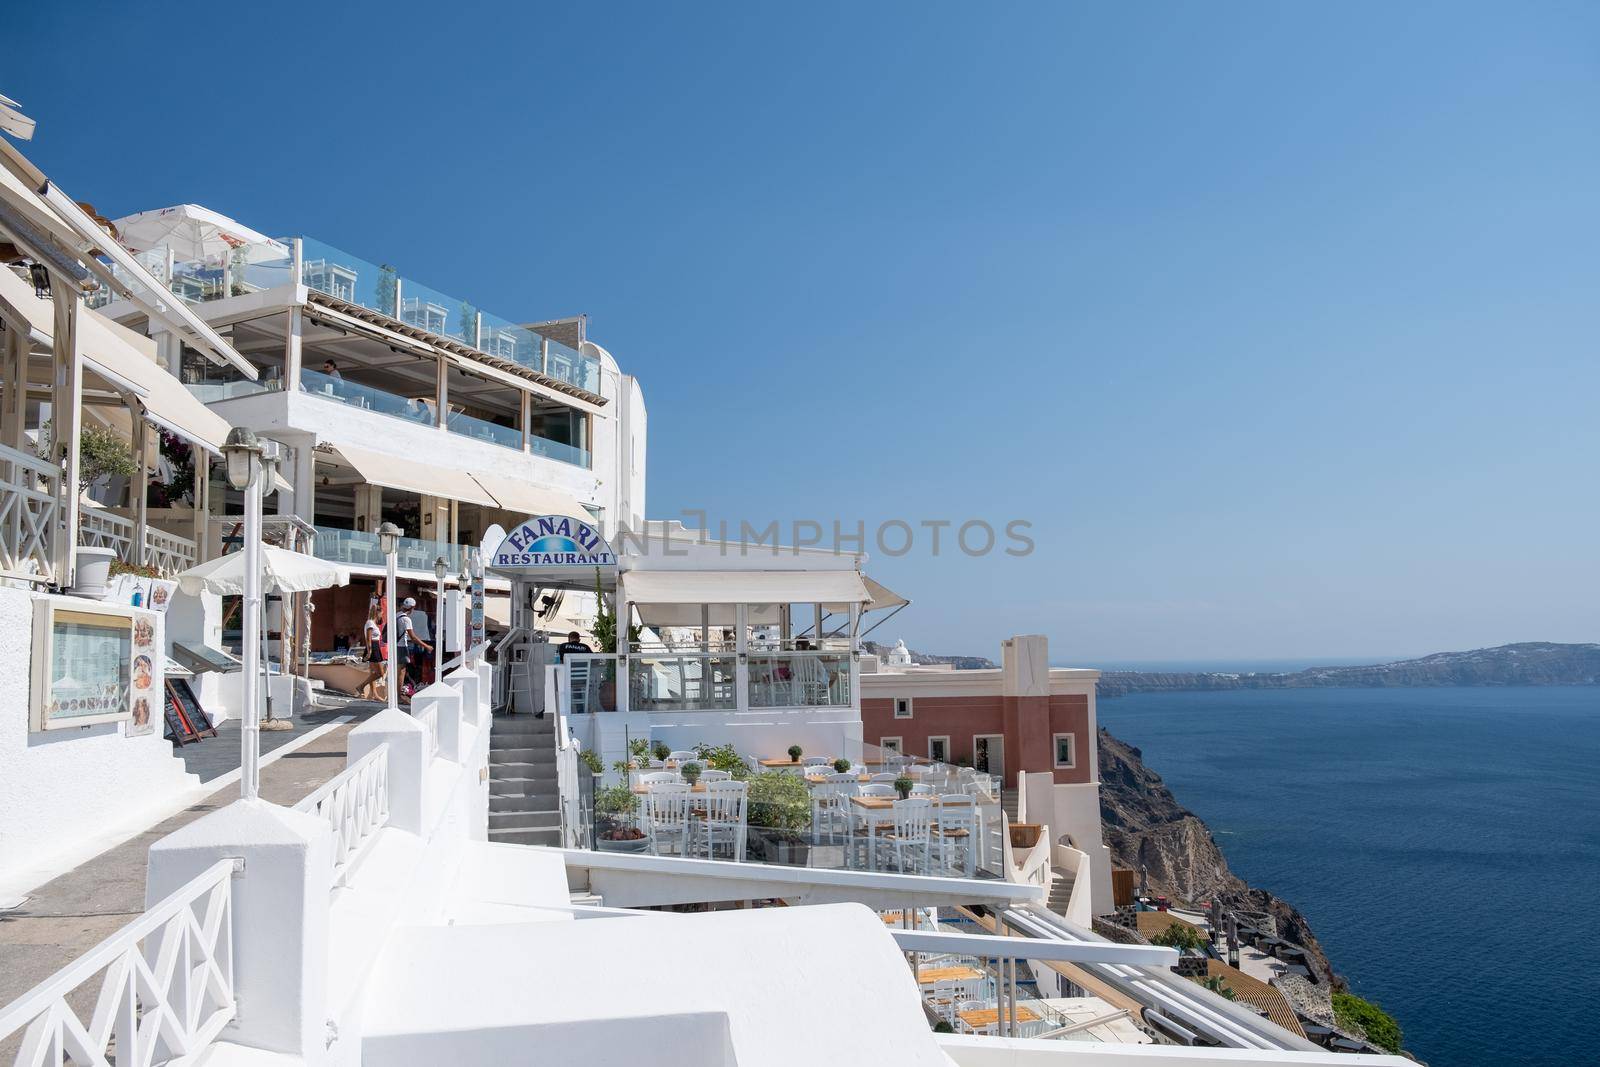 Santorini Greece August 2020,View to the sea and Volcano from Fira the capital of Santorini island in Greece by fokkebok